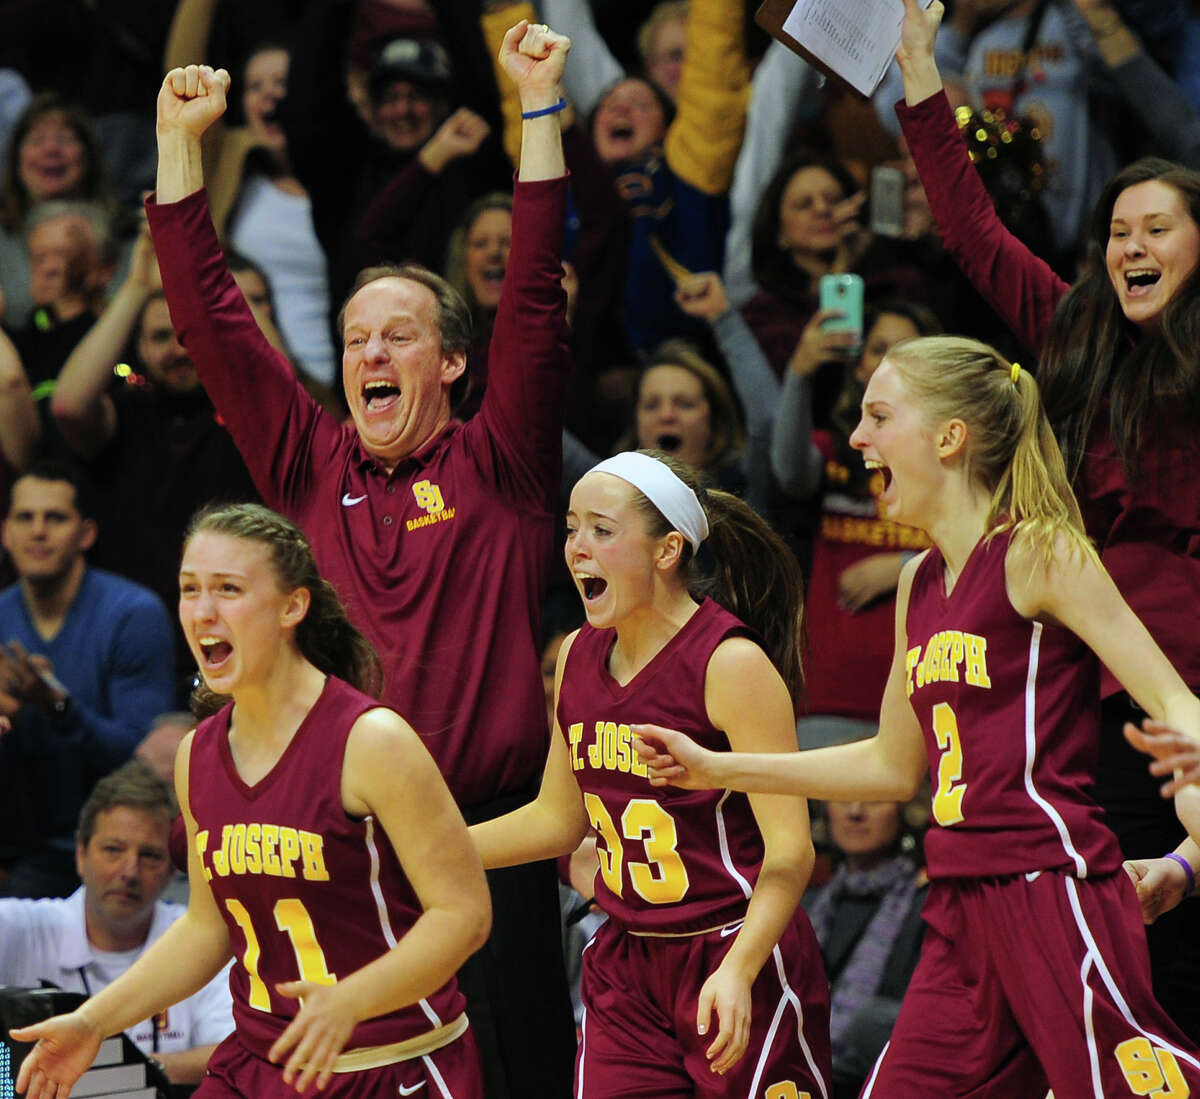 St. Joseph's coach Chris Lindwall and his team react as they beat Cromwell, during CIAC State Girls Basketball Tournament action at Mohegan Sun in Uncasville, Conn., on Saturday Mar. 21, 2015.